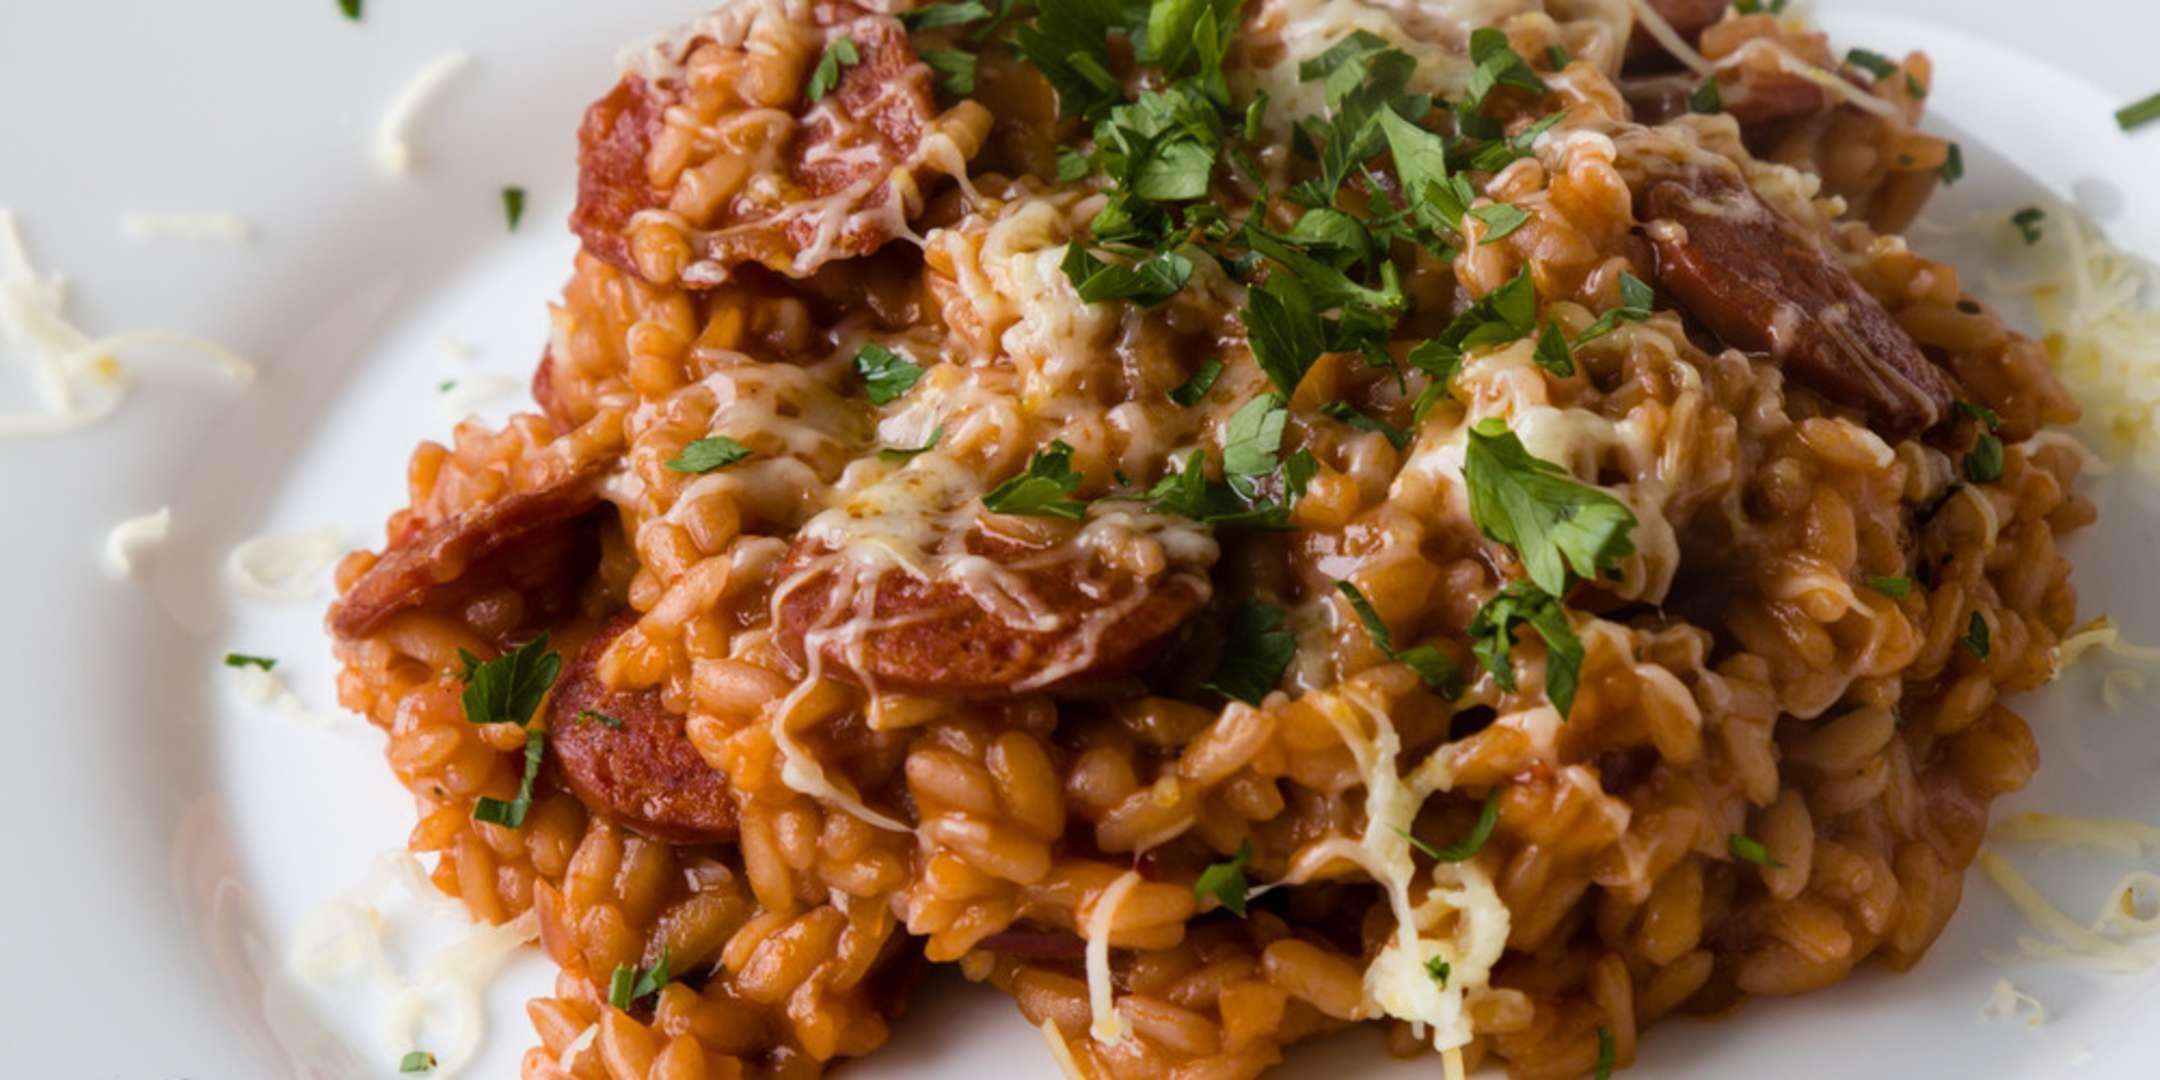 Classic Italian Risotto - Team Building by Cozymeal™